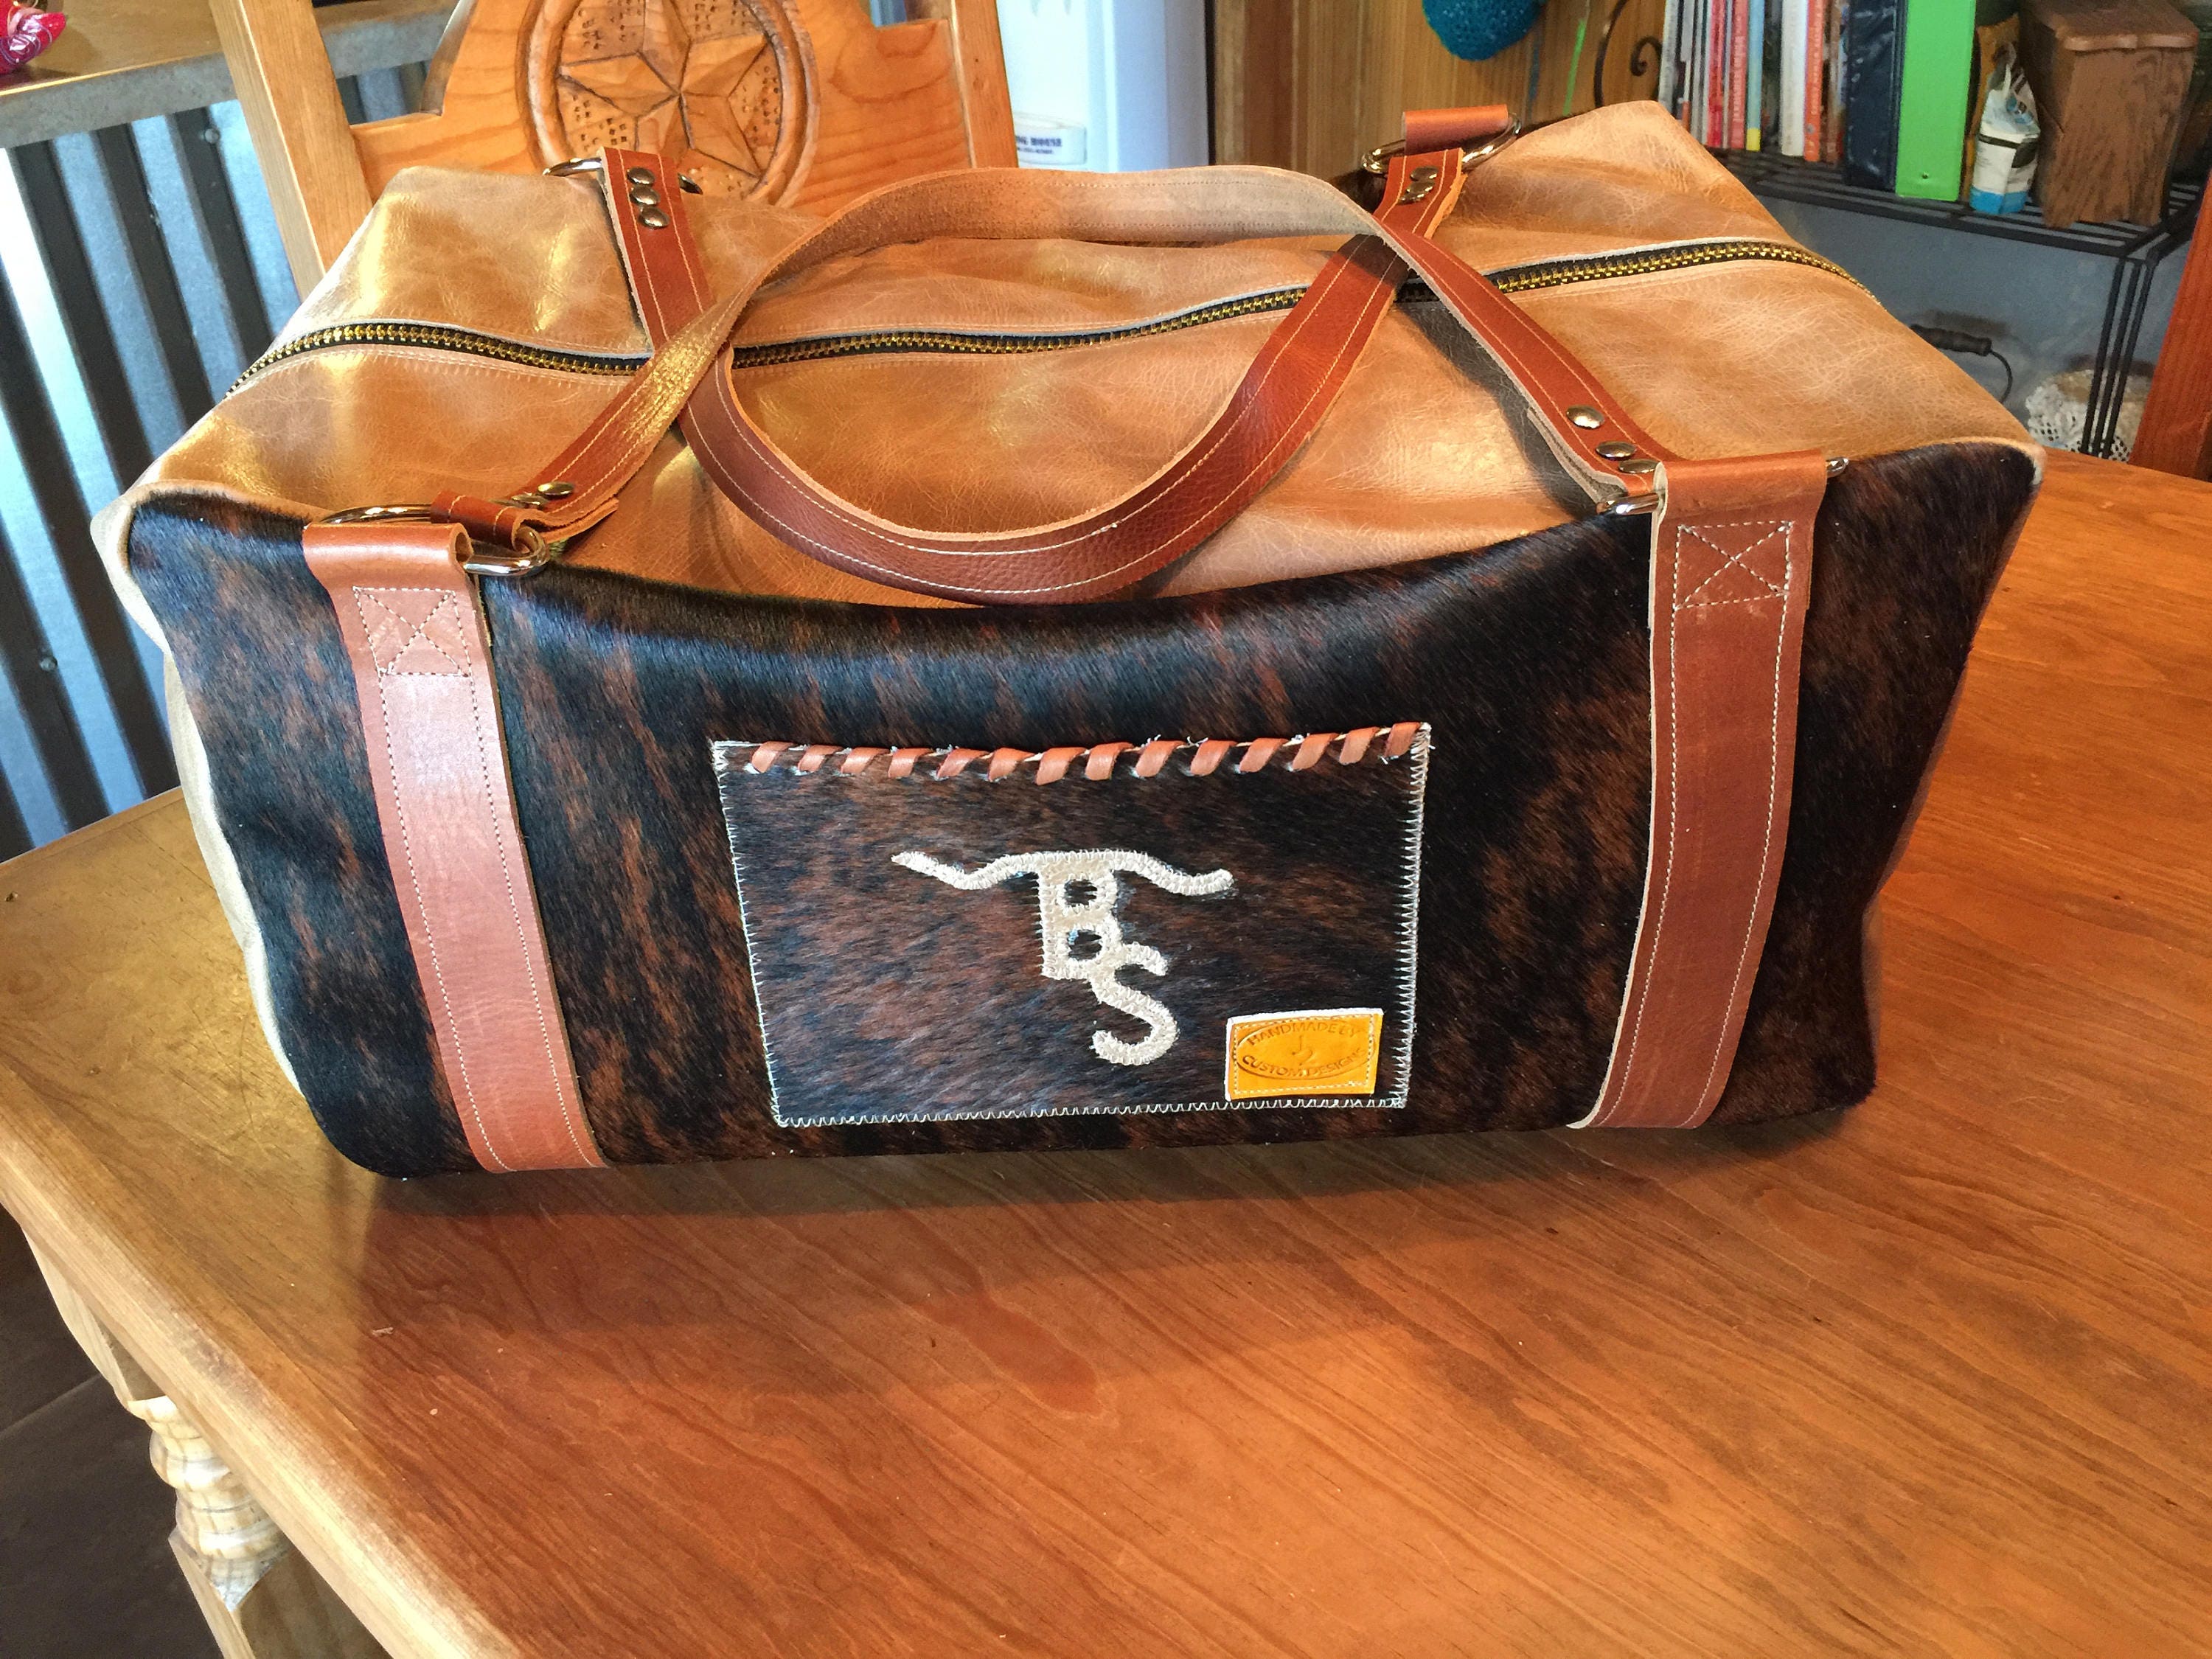 Cowhide Duffel Bag With Leather Straps Travel Bag 